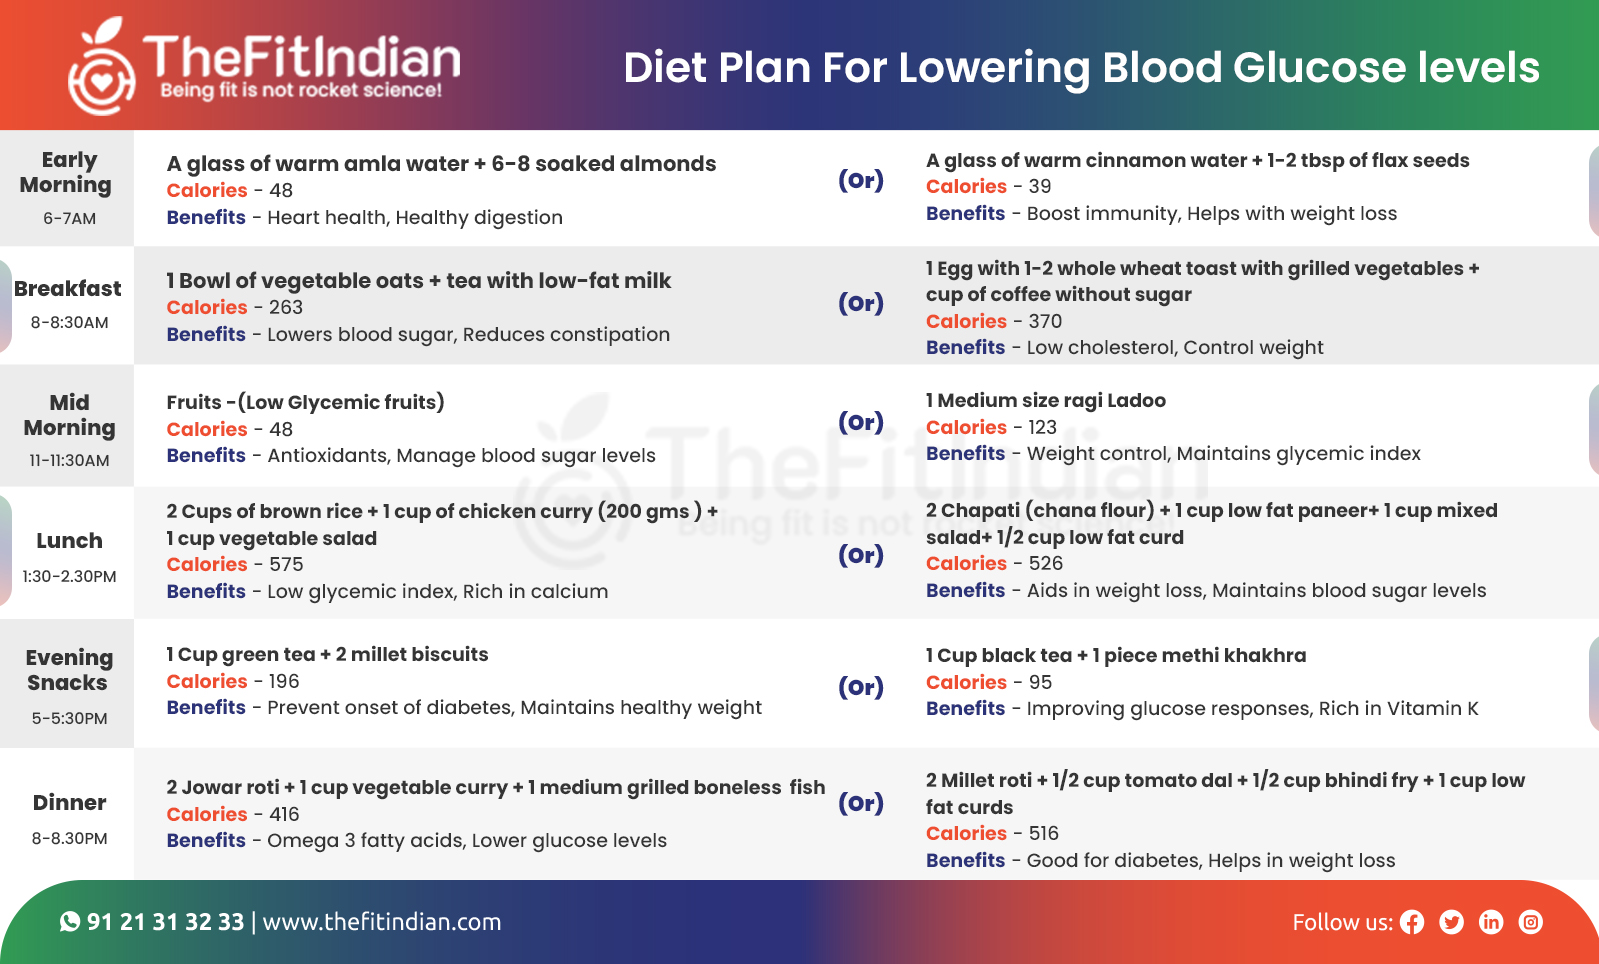 Diet Plan For Lower Blood Glucose levels